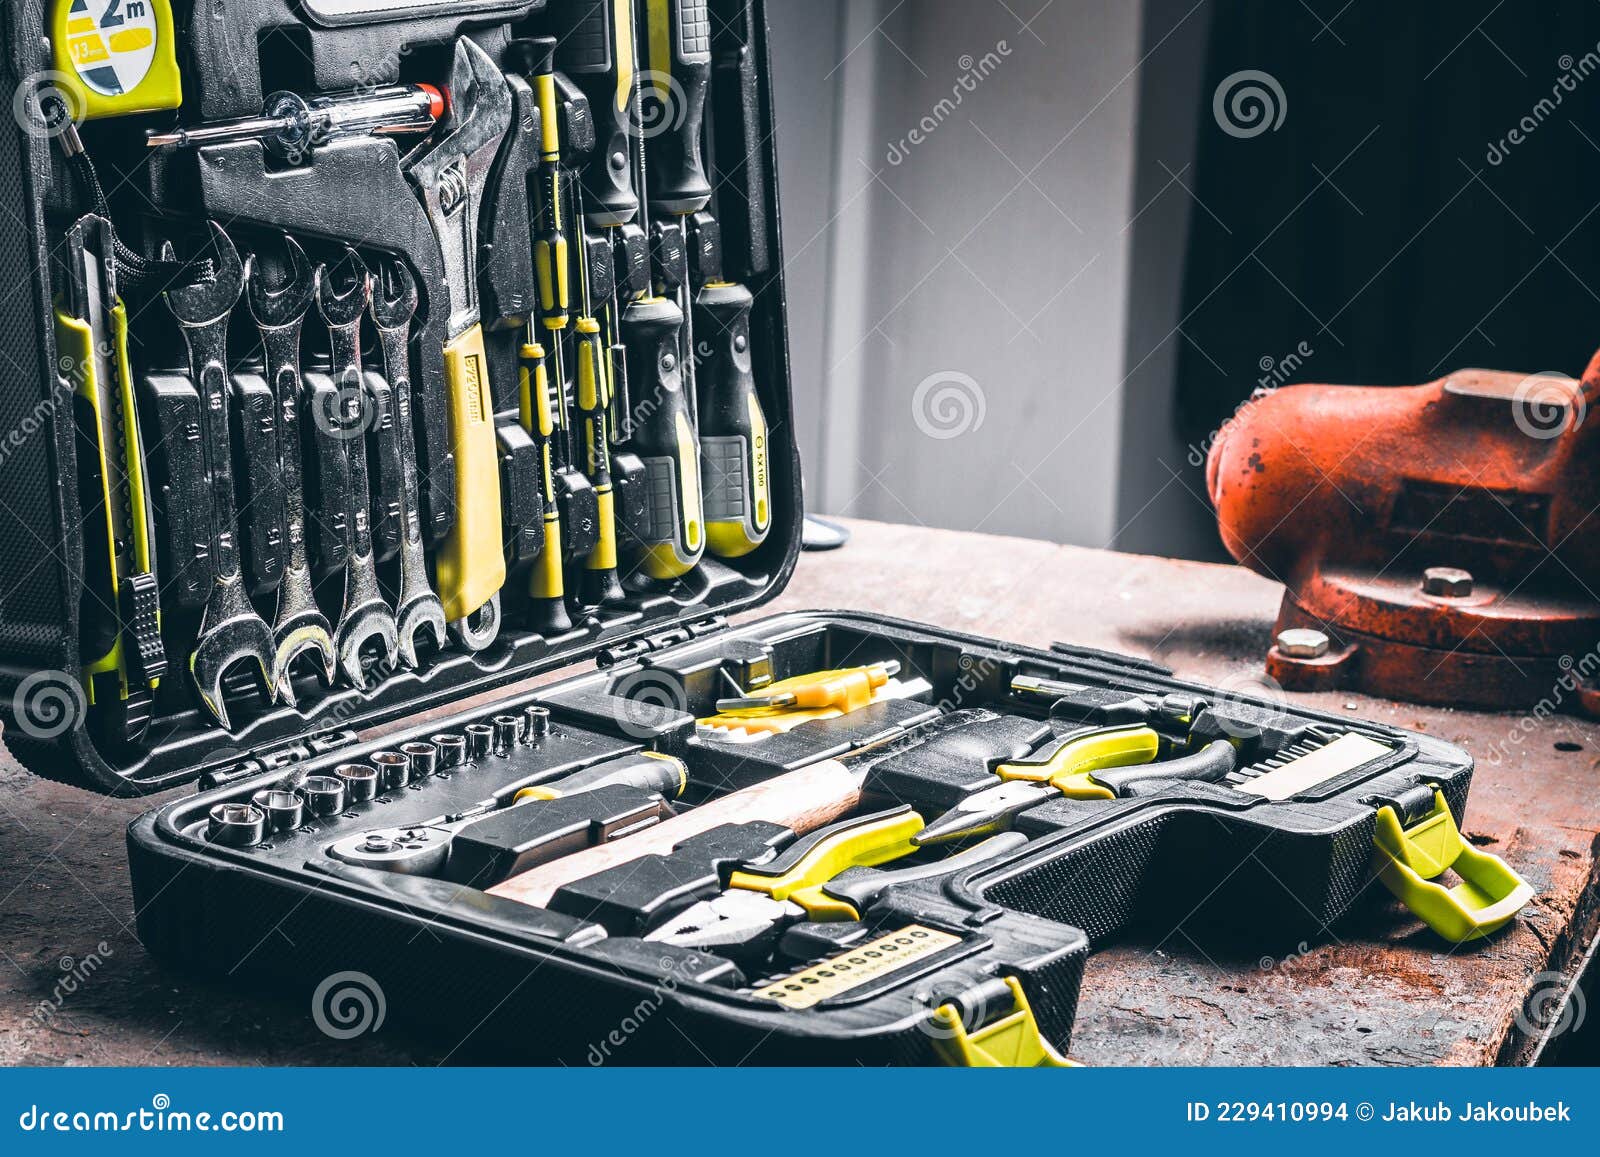 open tool-box with many tools.